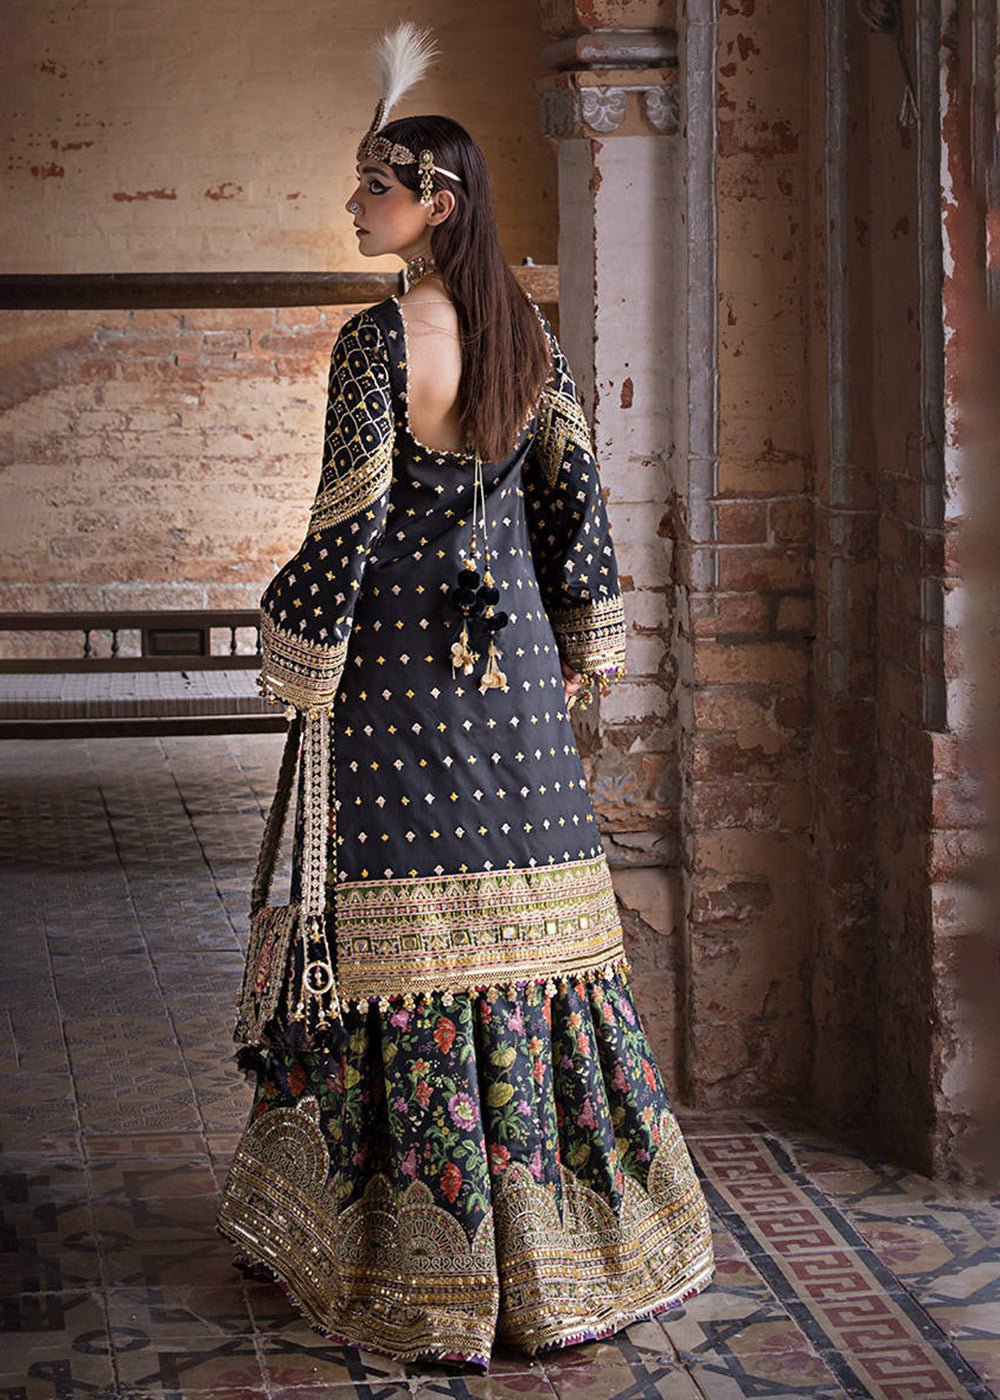 Buy Now Talpur Dynasty '23 - Unstitched Festive Vol. IV by MNR - KOYAL Online at Empress Online in USA, UK, Canada & Worldwide at Empress Clothing.